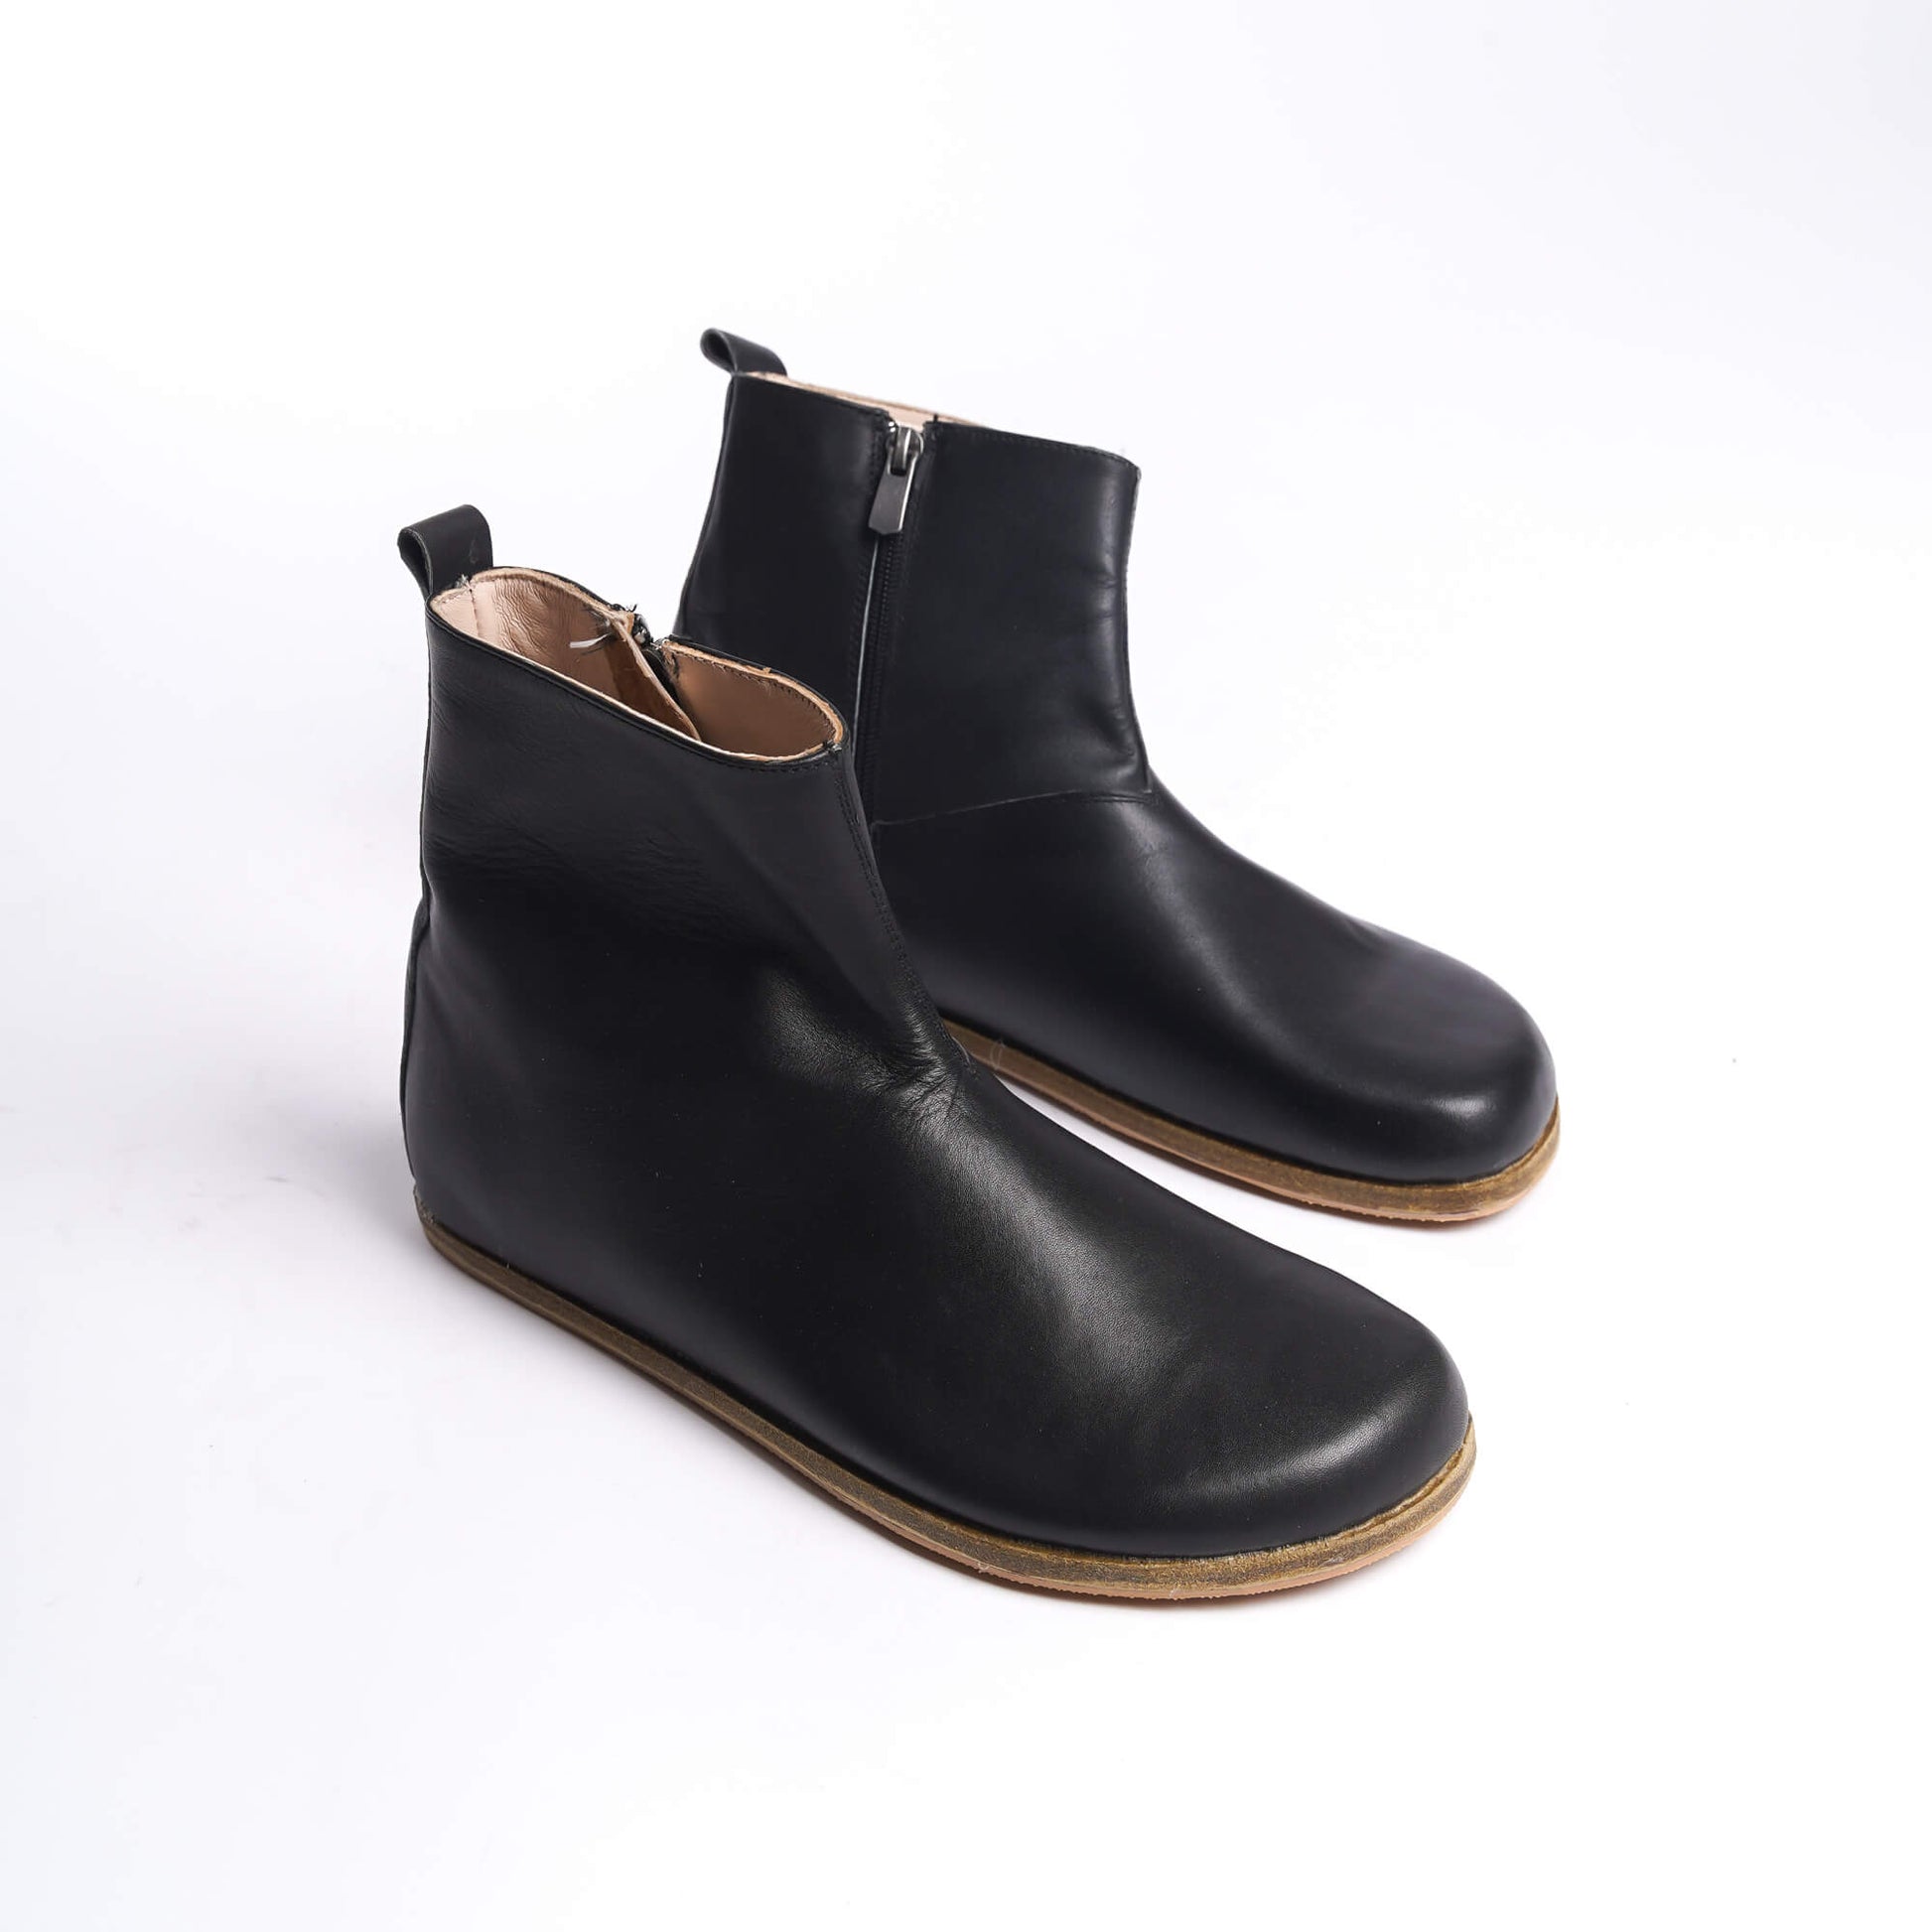 Pair of black ankle boots for men, crafted from genuine leather with a convenient side zipper for easy use.